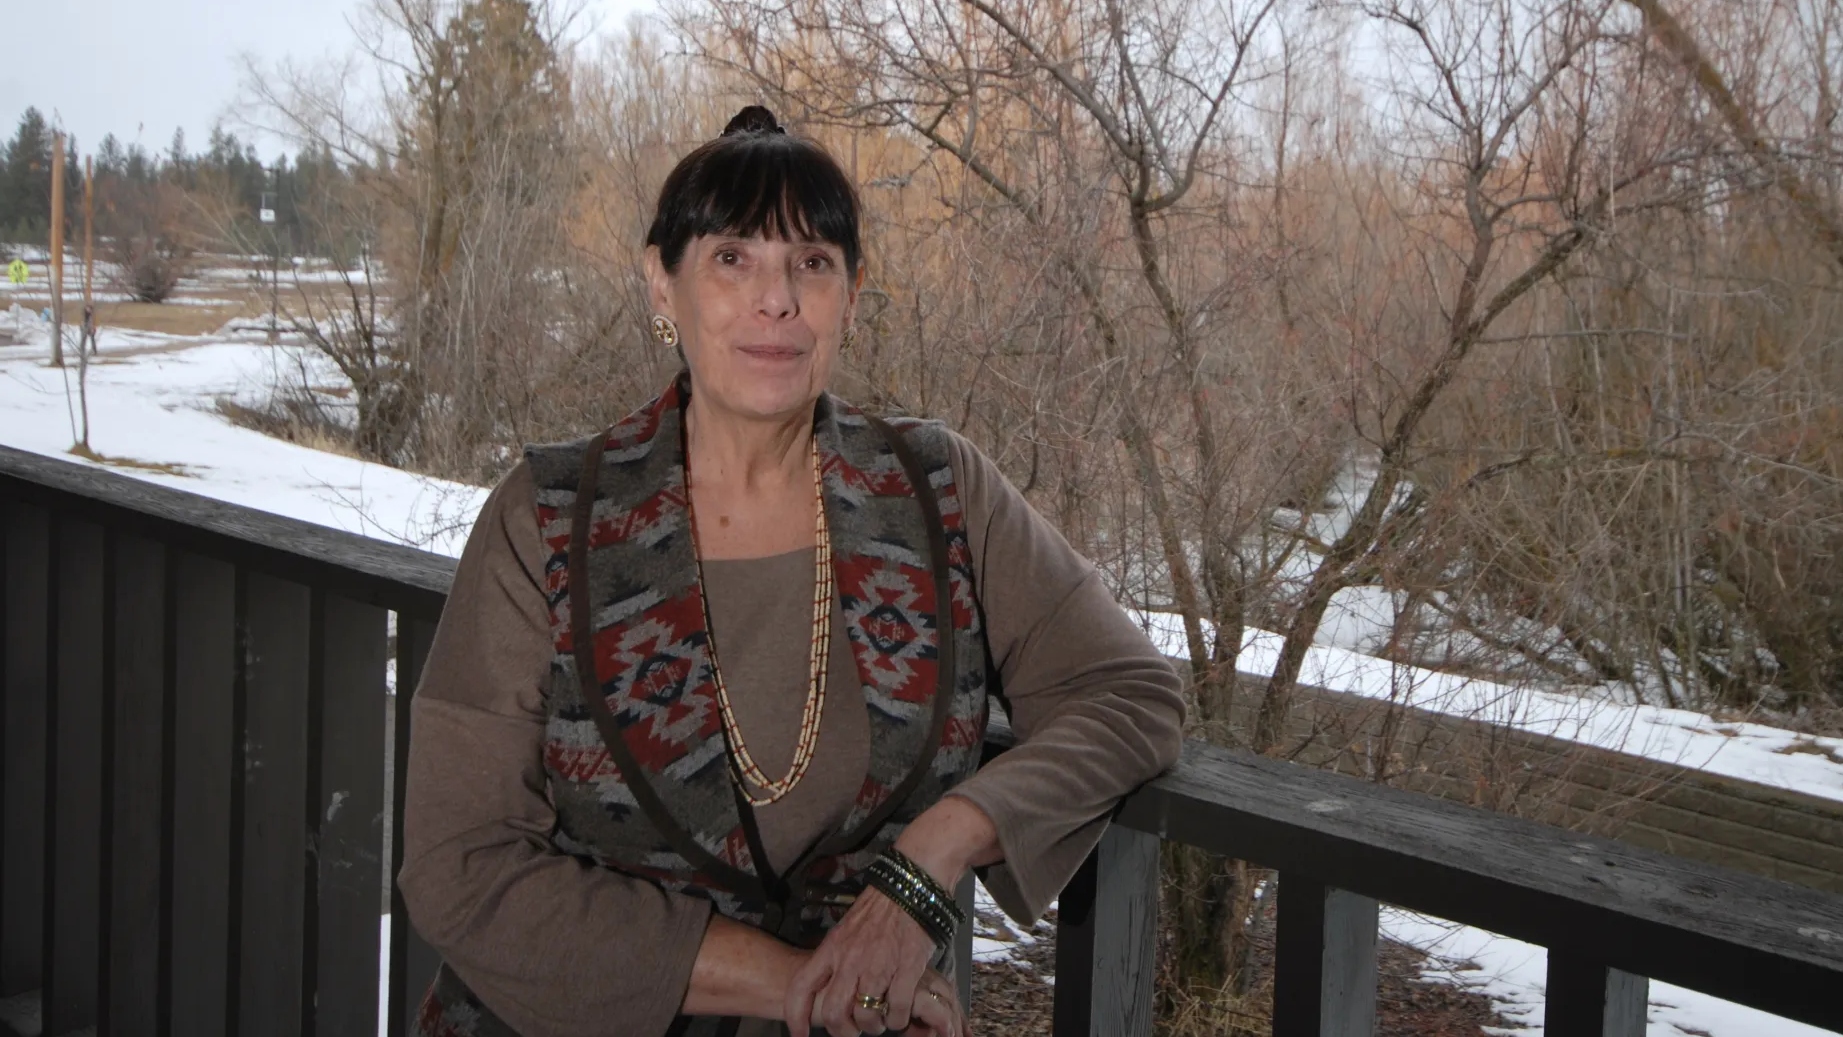 A woman with dark hair and bangs wears a brown shirt and a colorful scarf, and stands on a deck in front of a snowy yard.